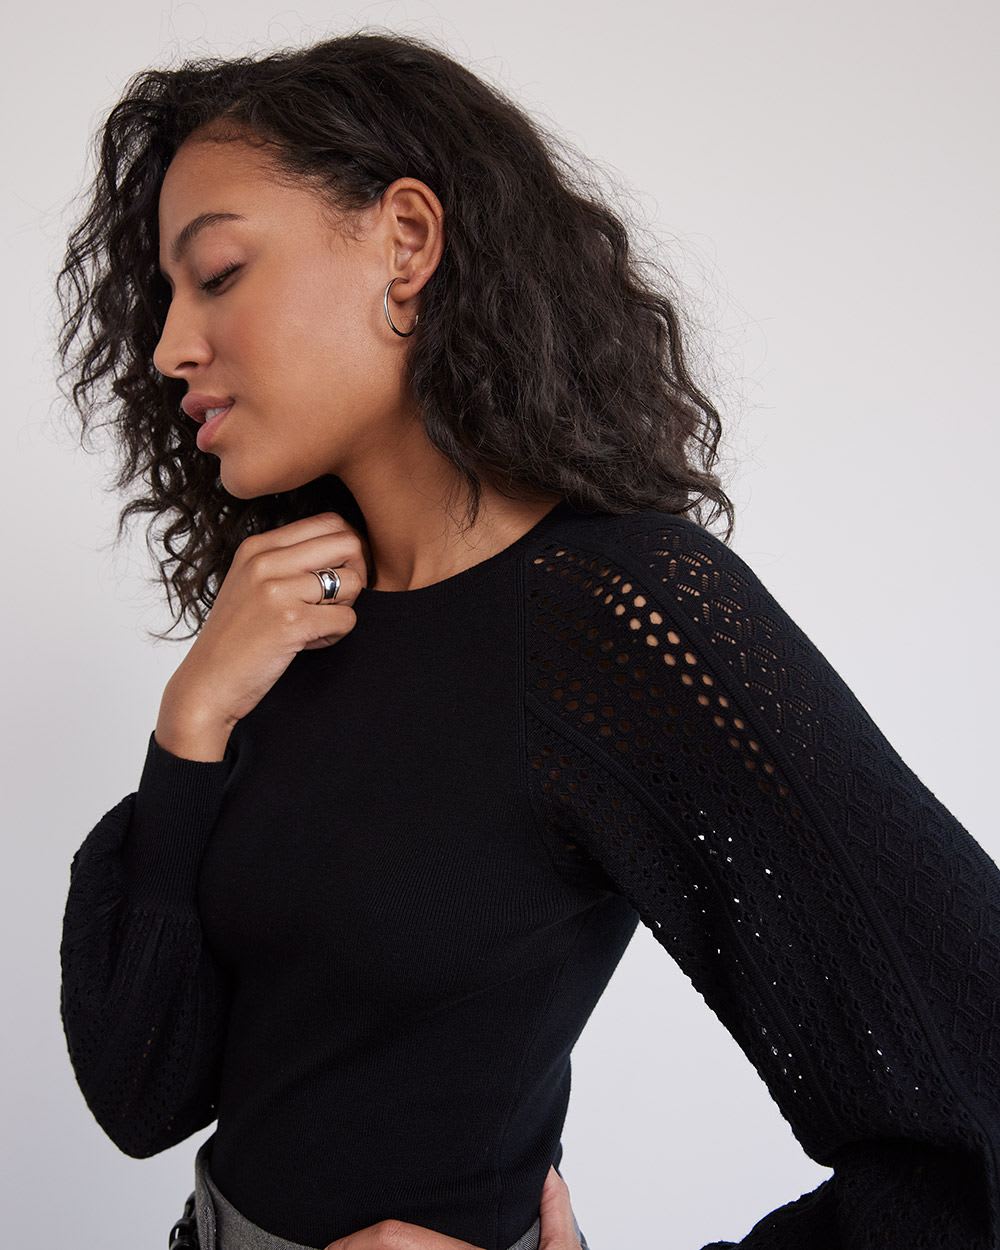 Long-Puffy-Sleeve Crew-Neck Sweater with Pointelle Stitches